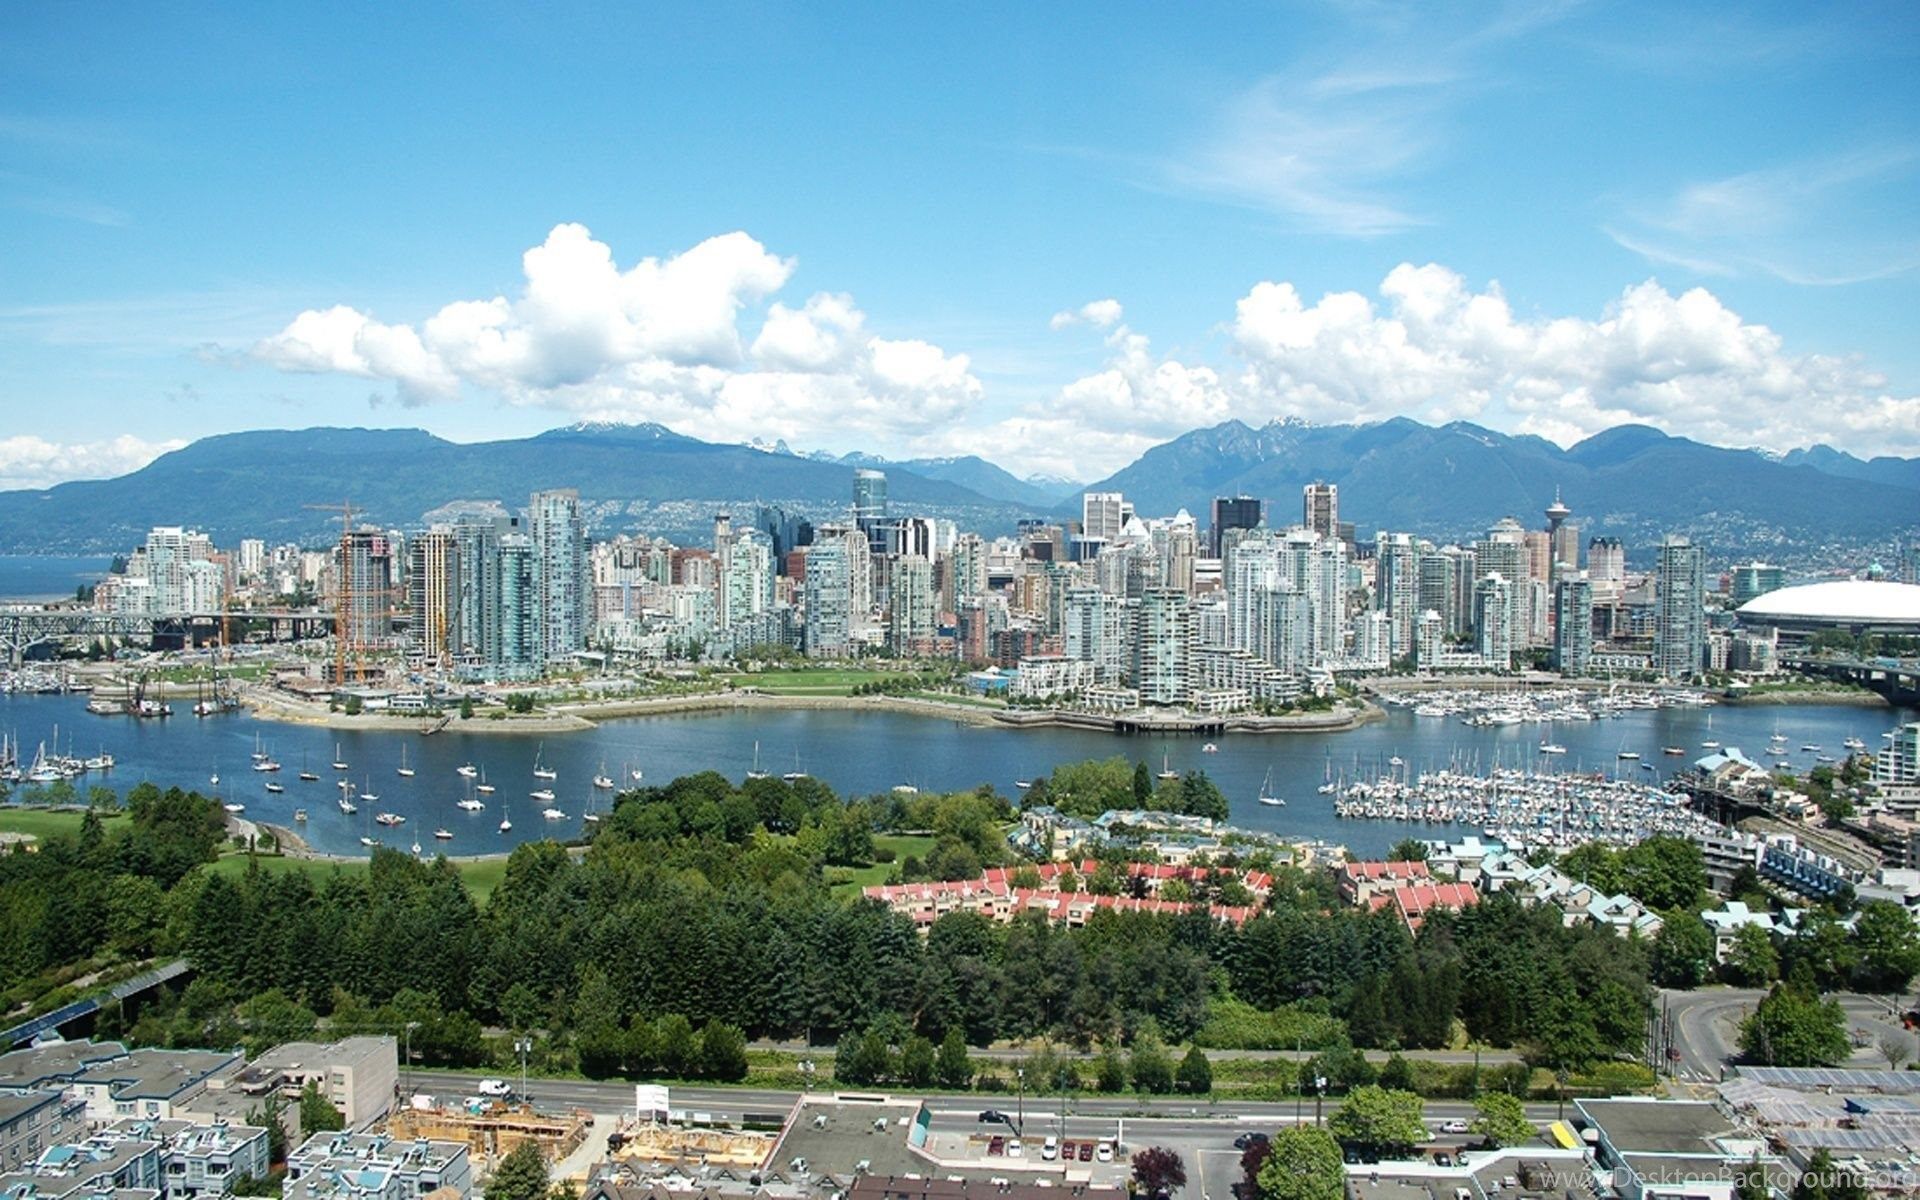 Vancouver Wallpapers Px, - Vancouver Wallpaper Day - HD Wallpaper 